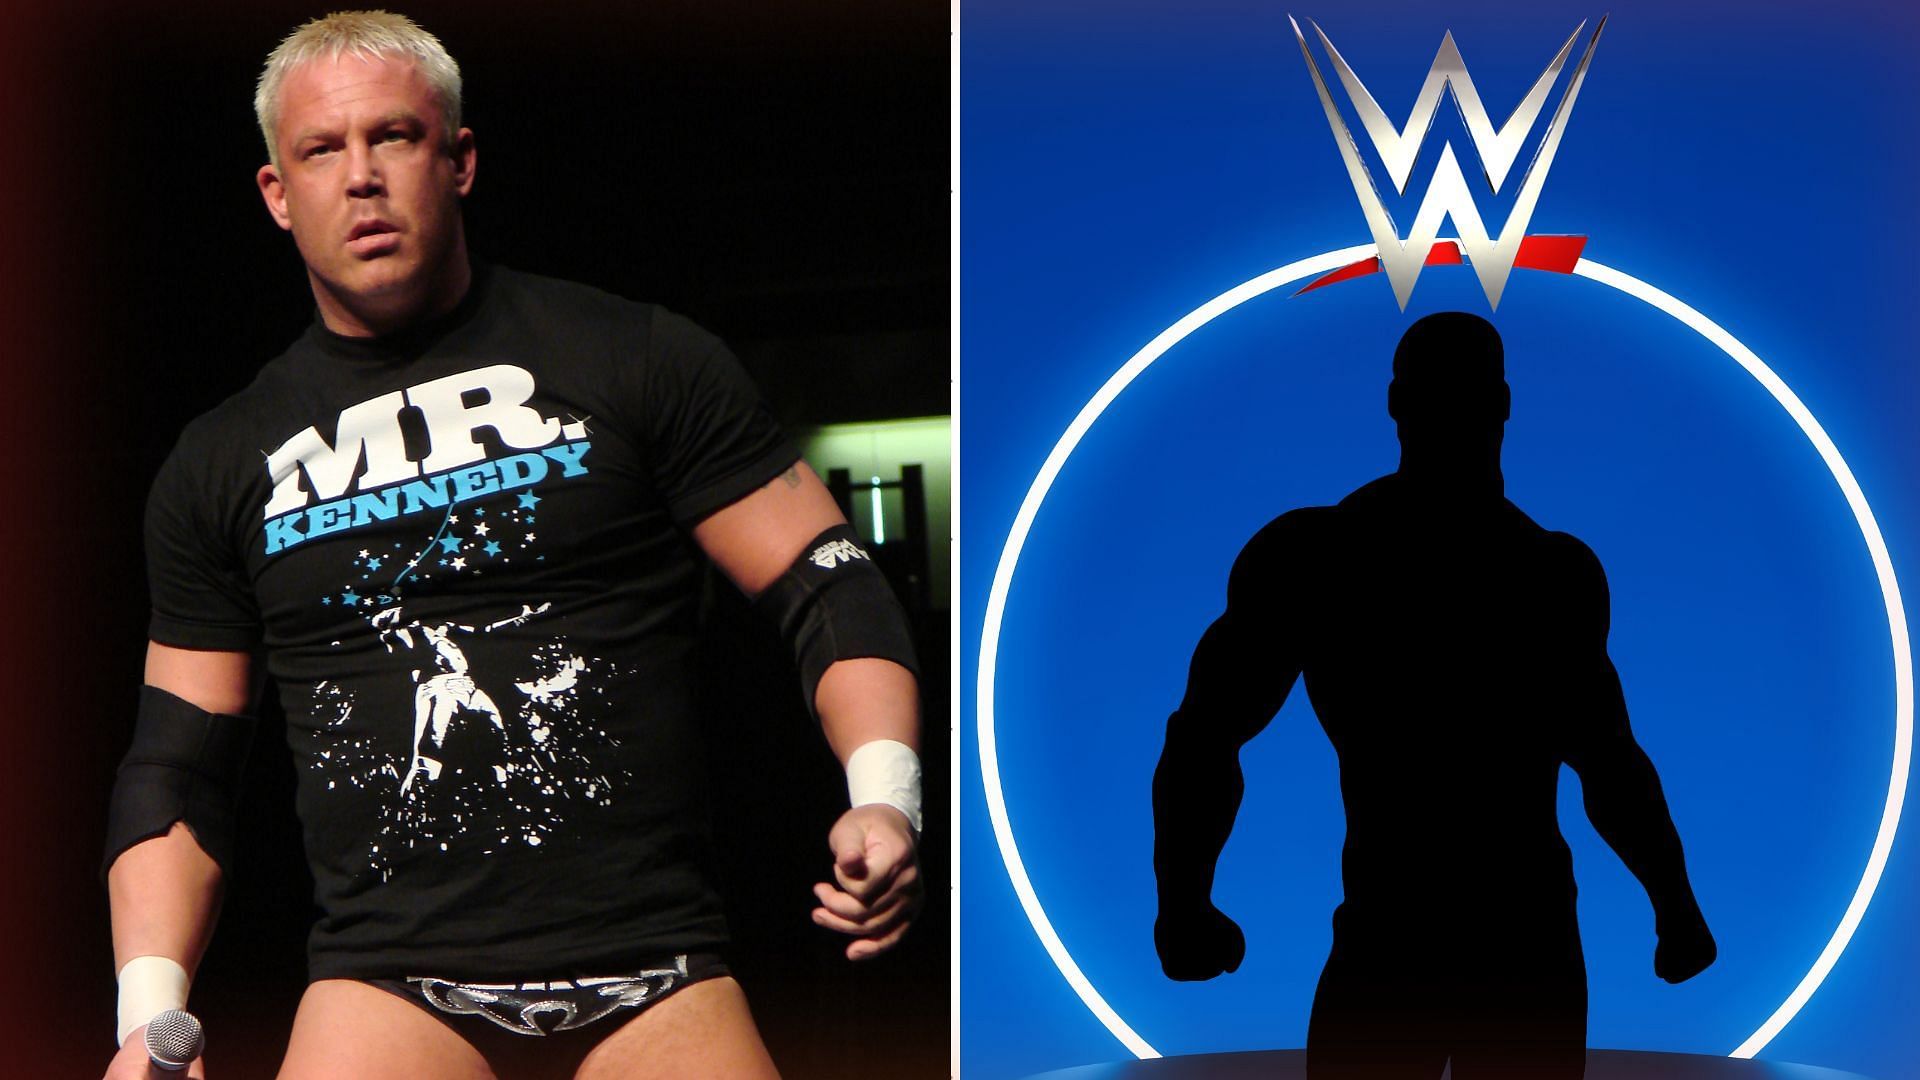 Former WWE Superstar Mr. Kennedy is training current WWE Star at his Wrestling School